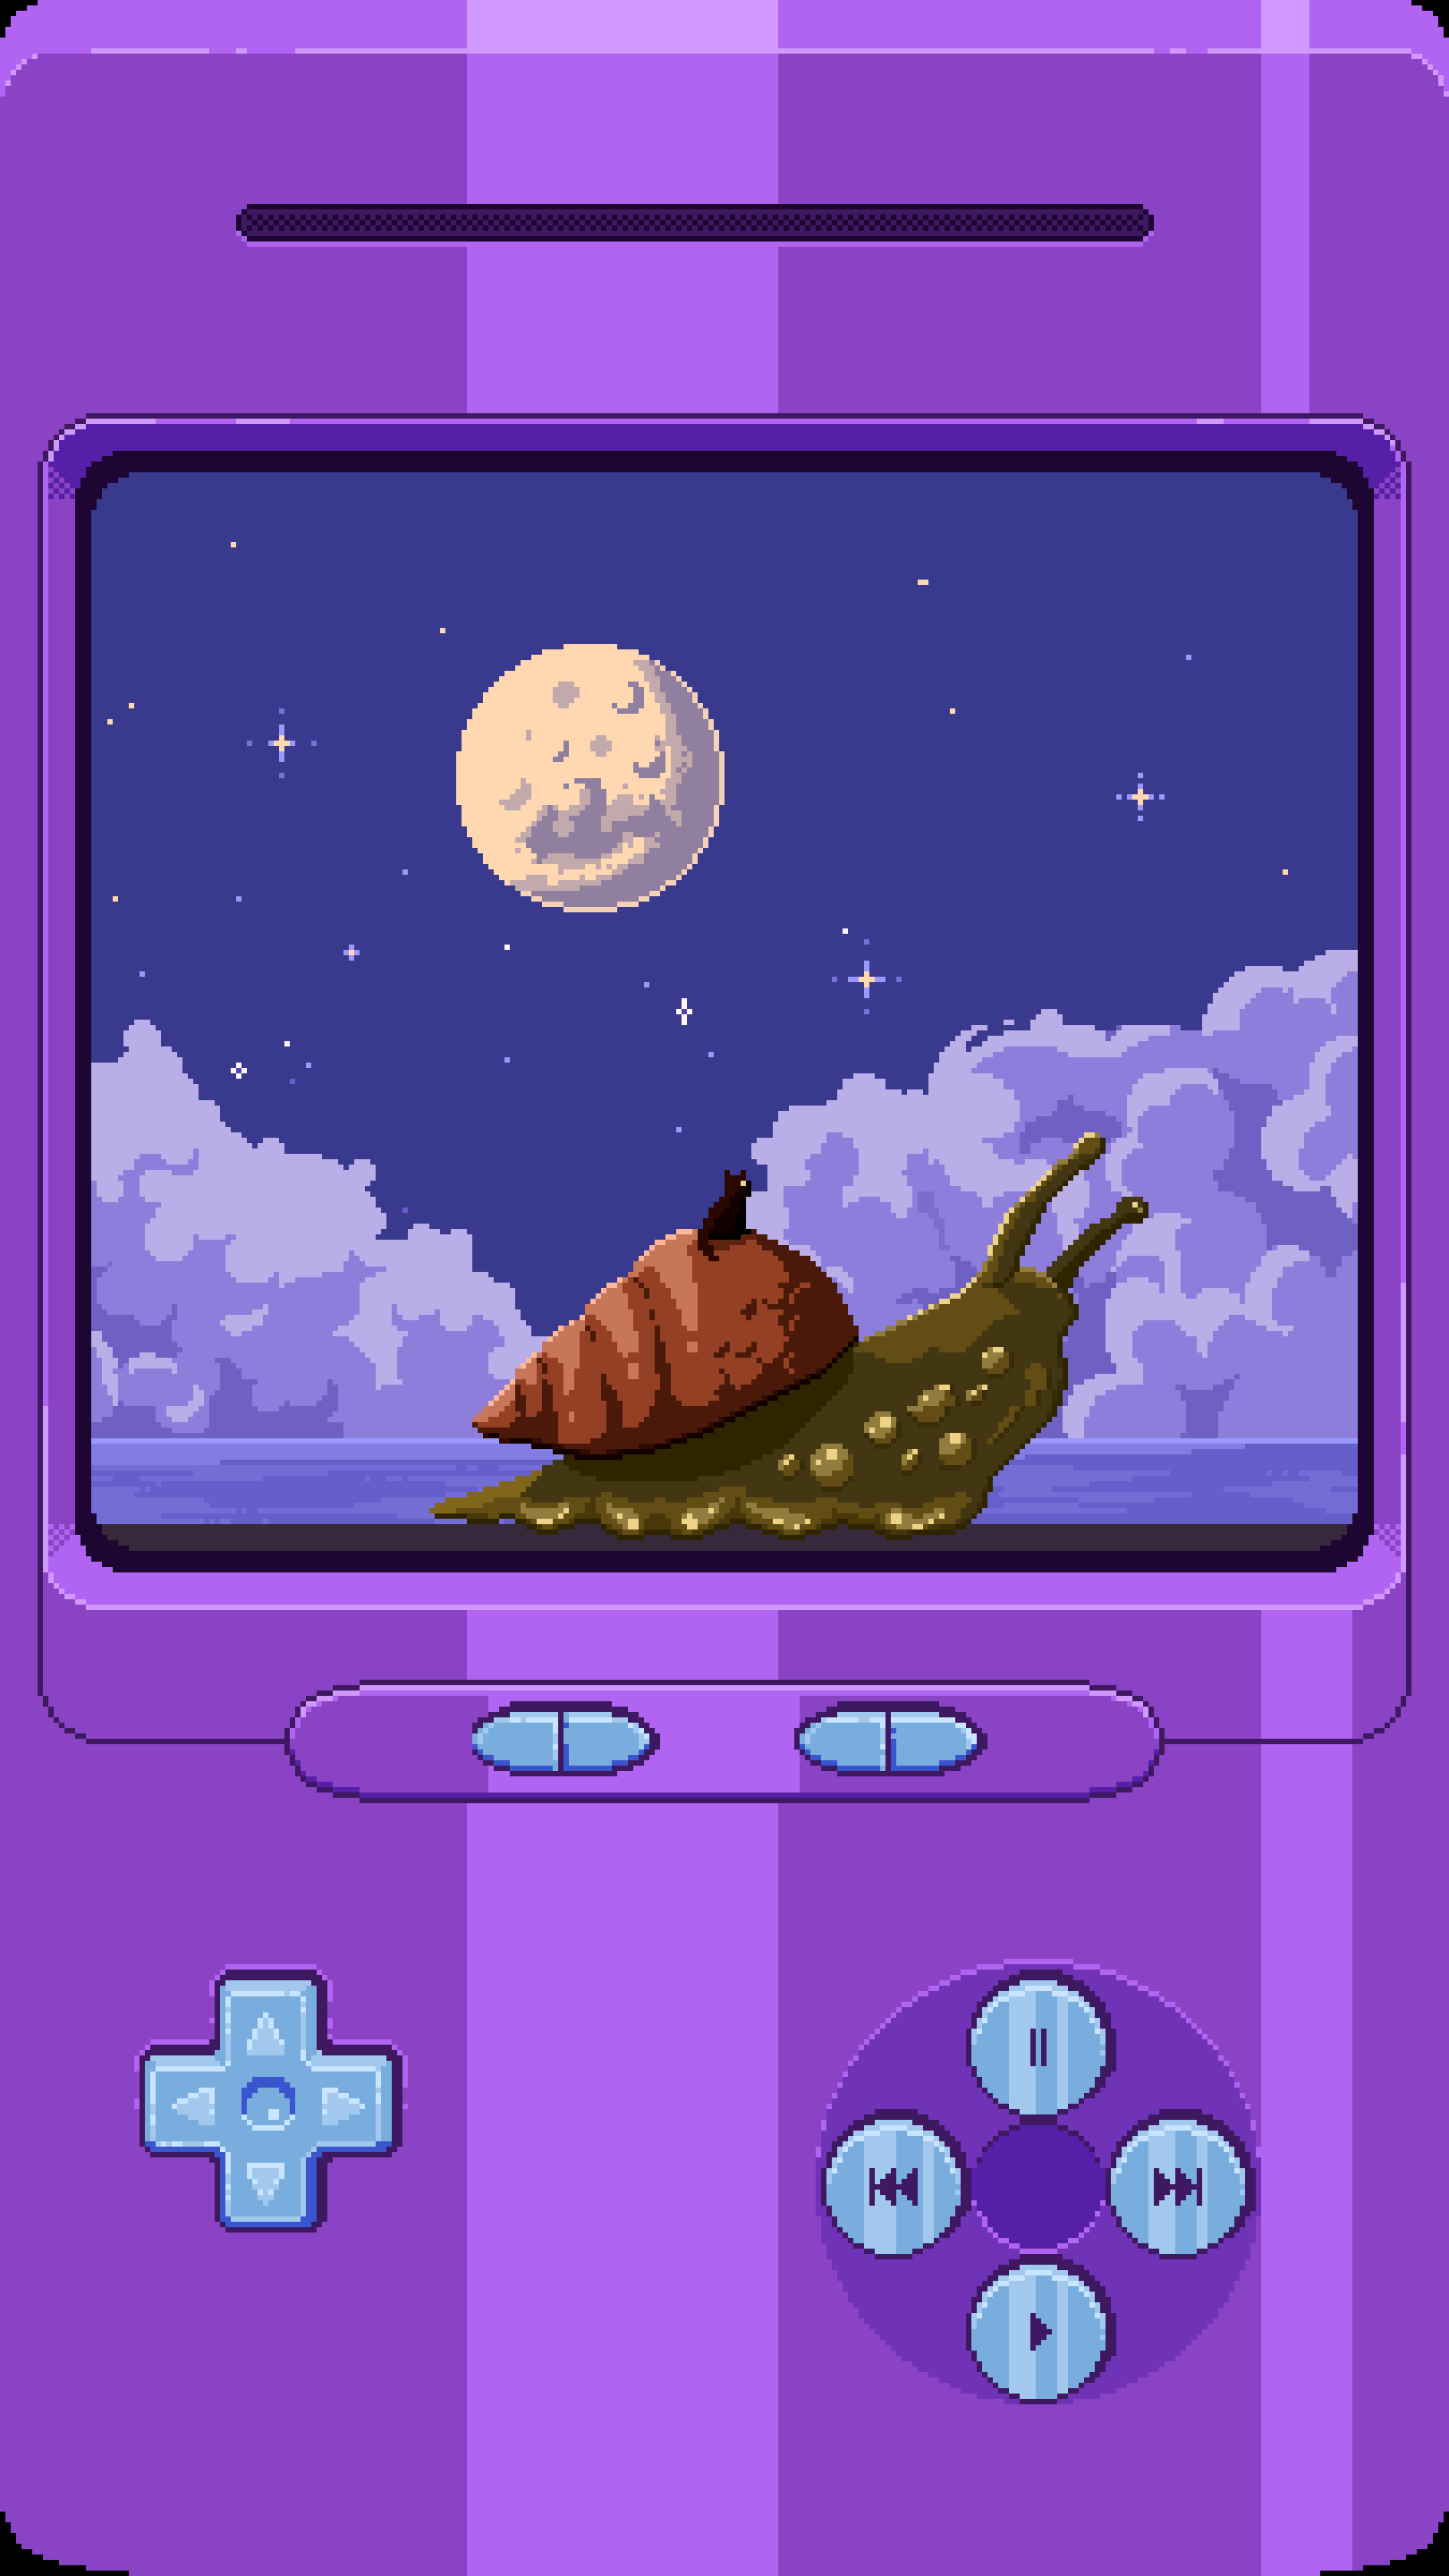 A purple handheld game console with a snail on the screen. - Game Boy